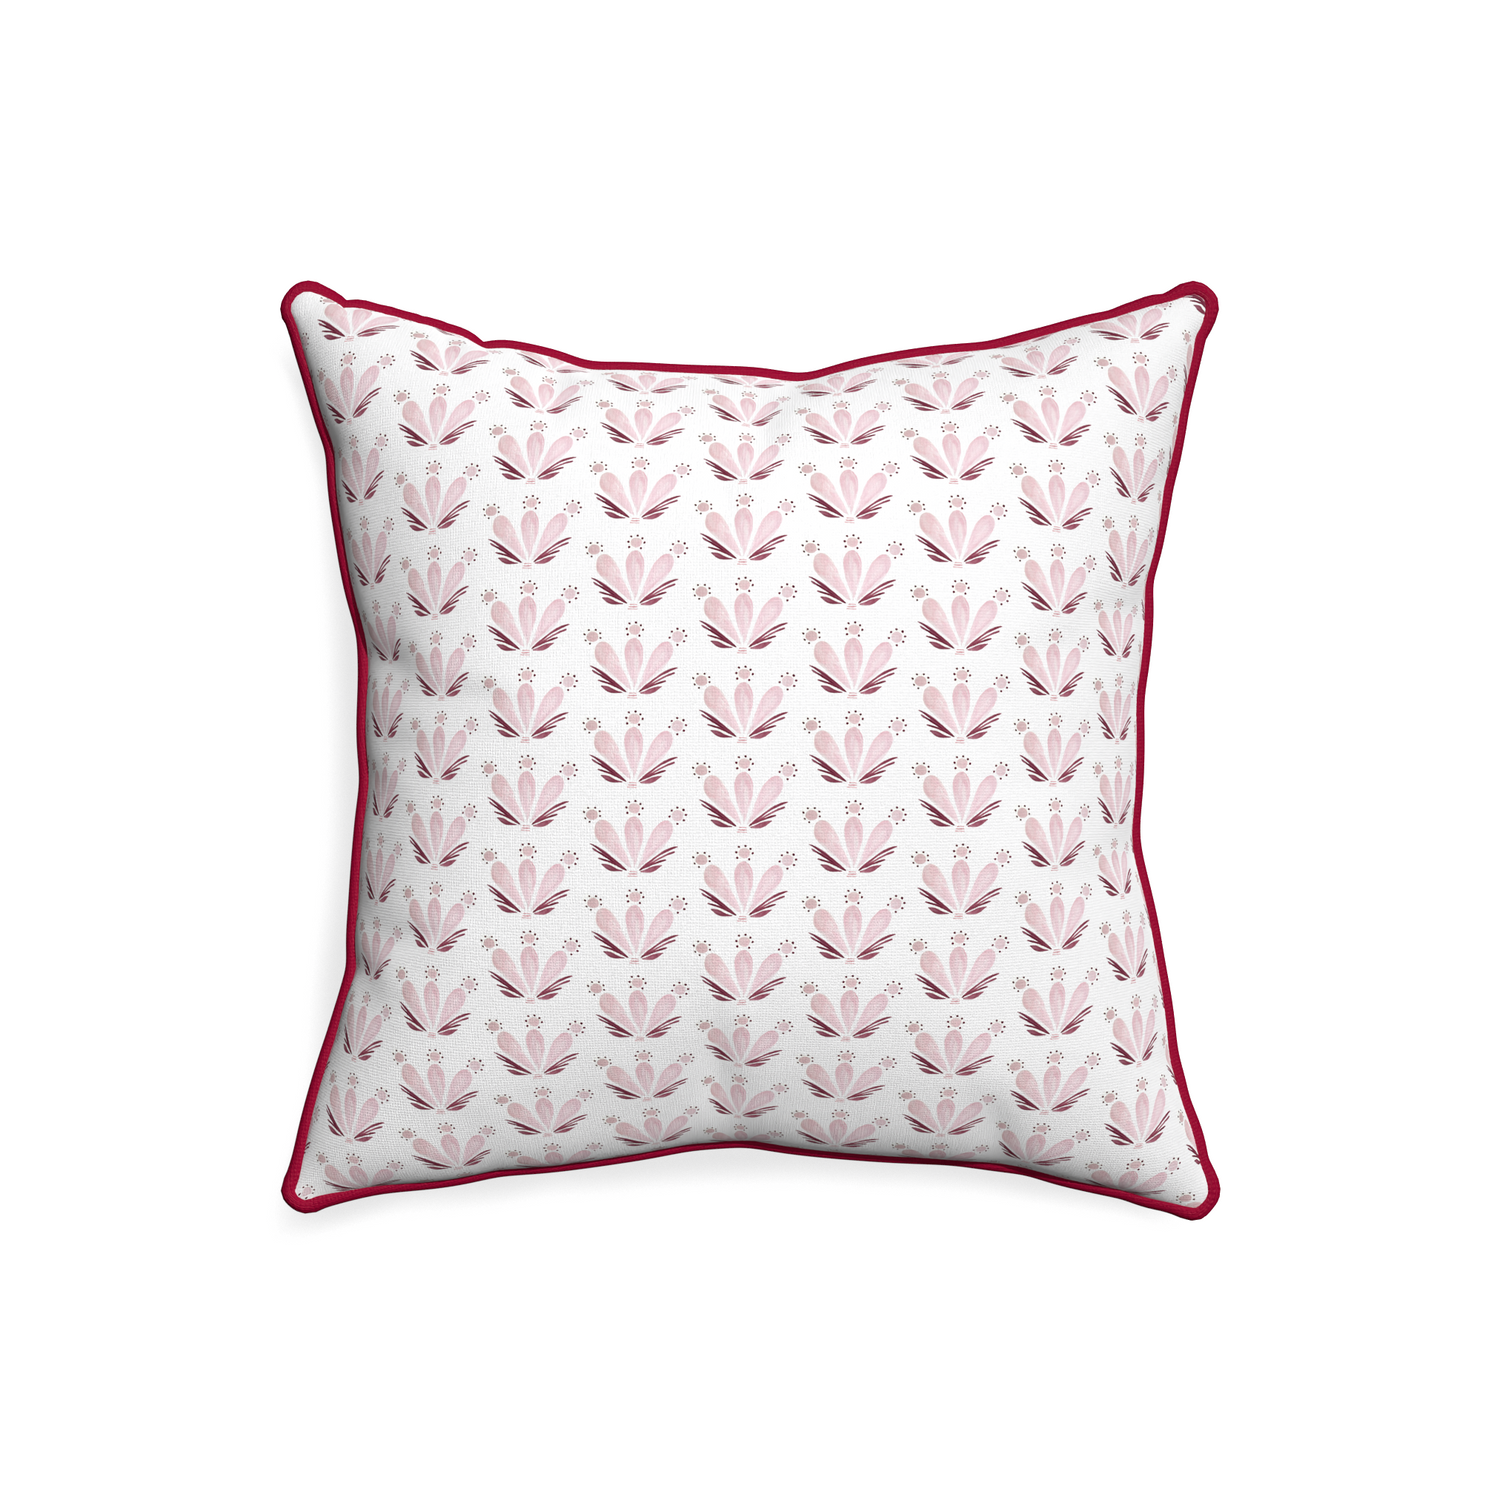 20-square serena pink custom pillow with raspberry piping on white background